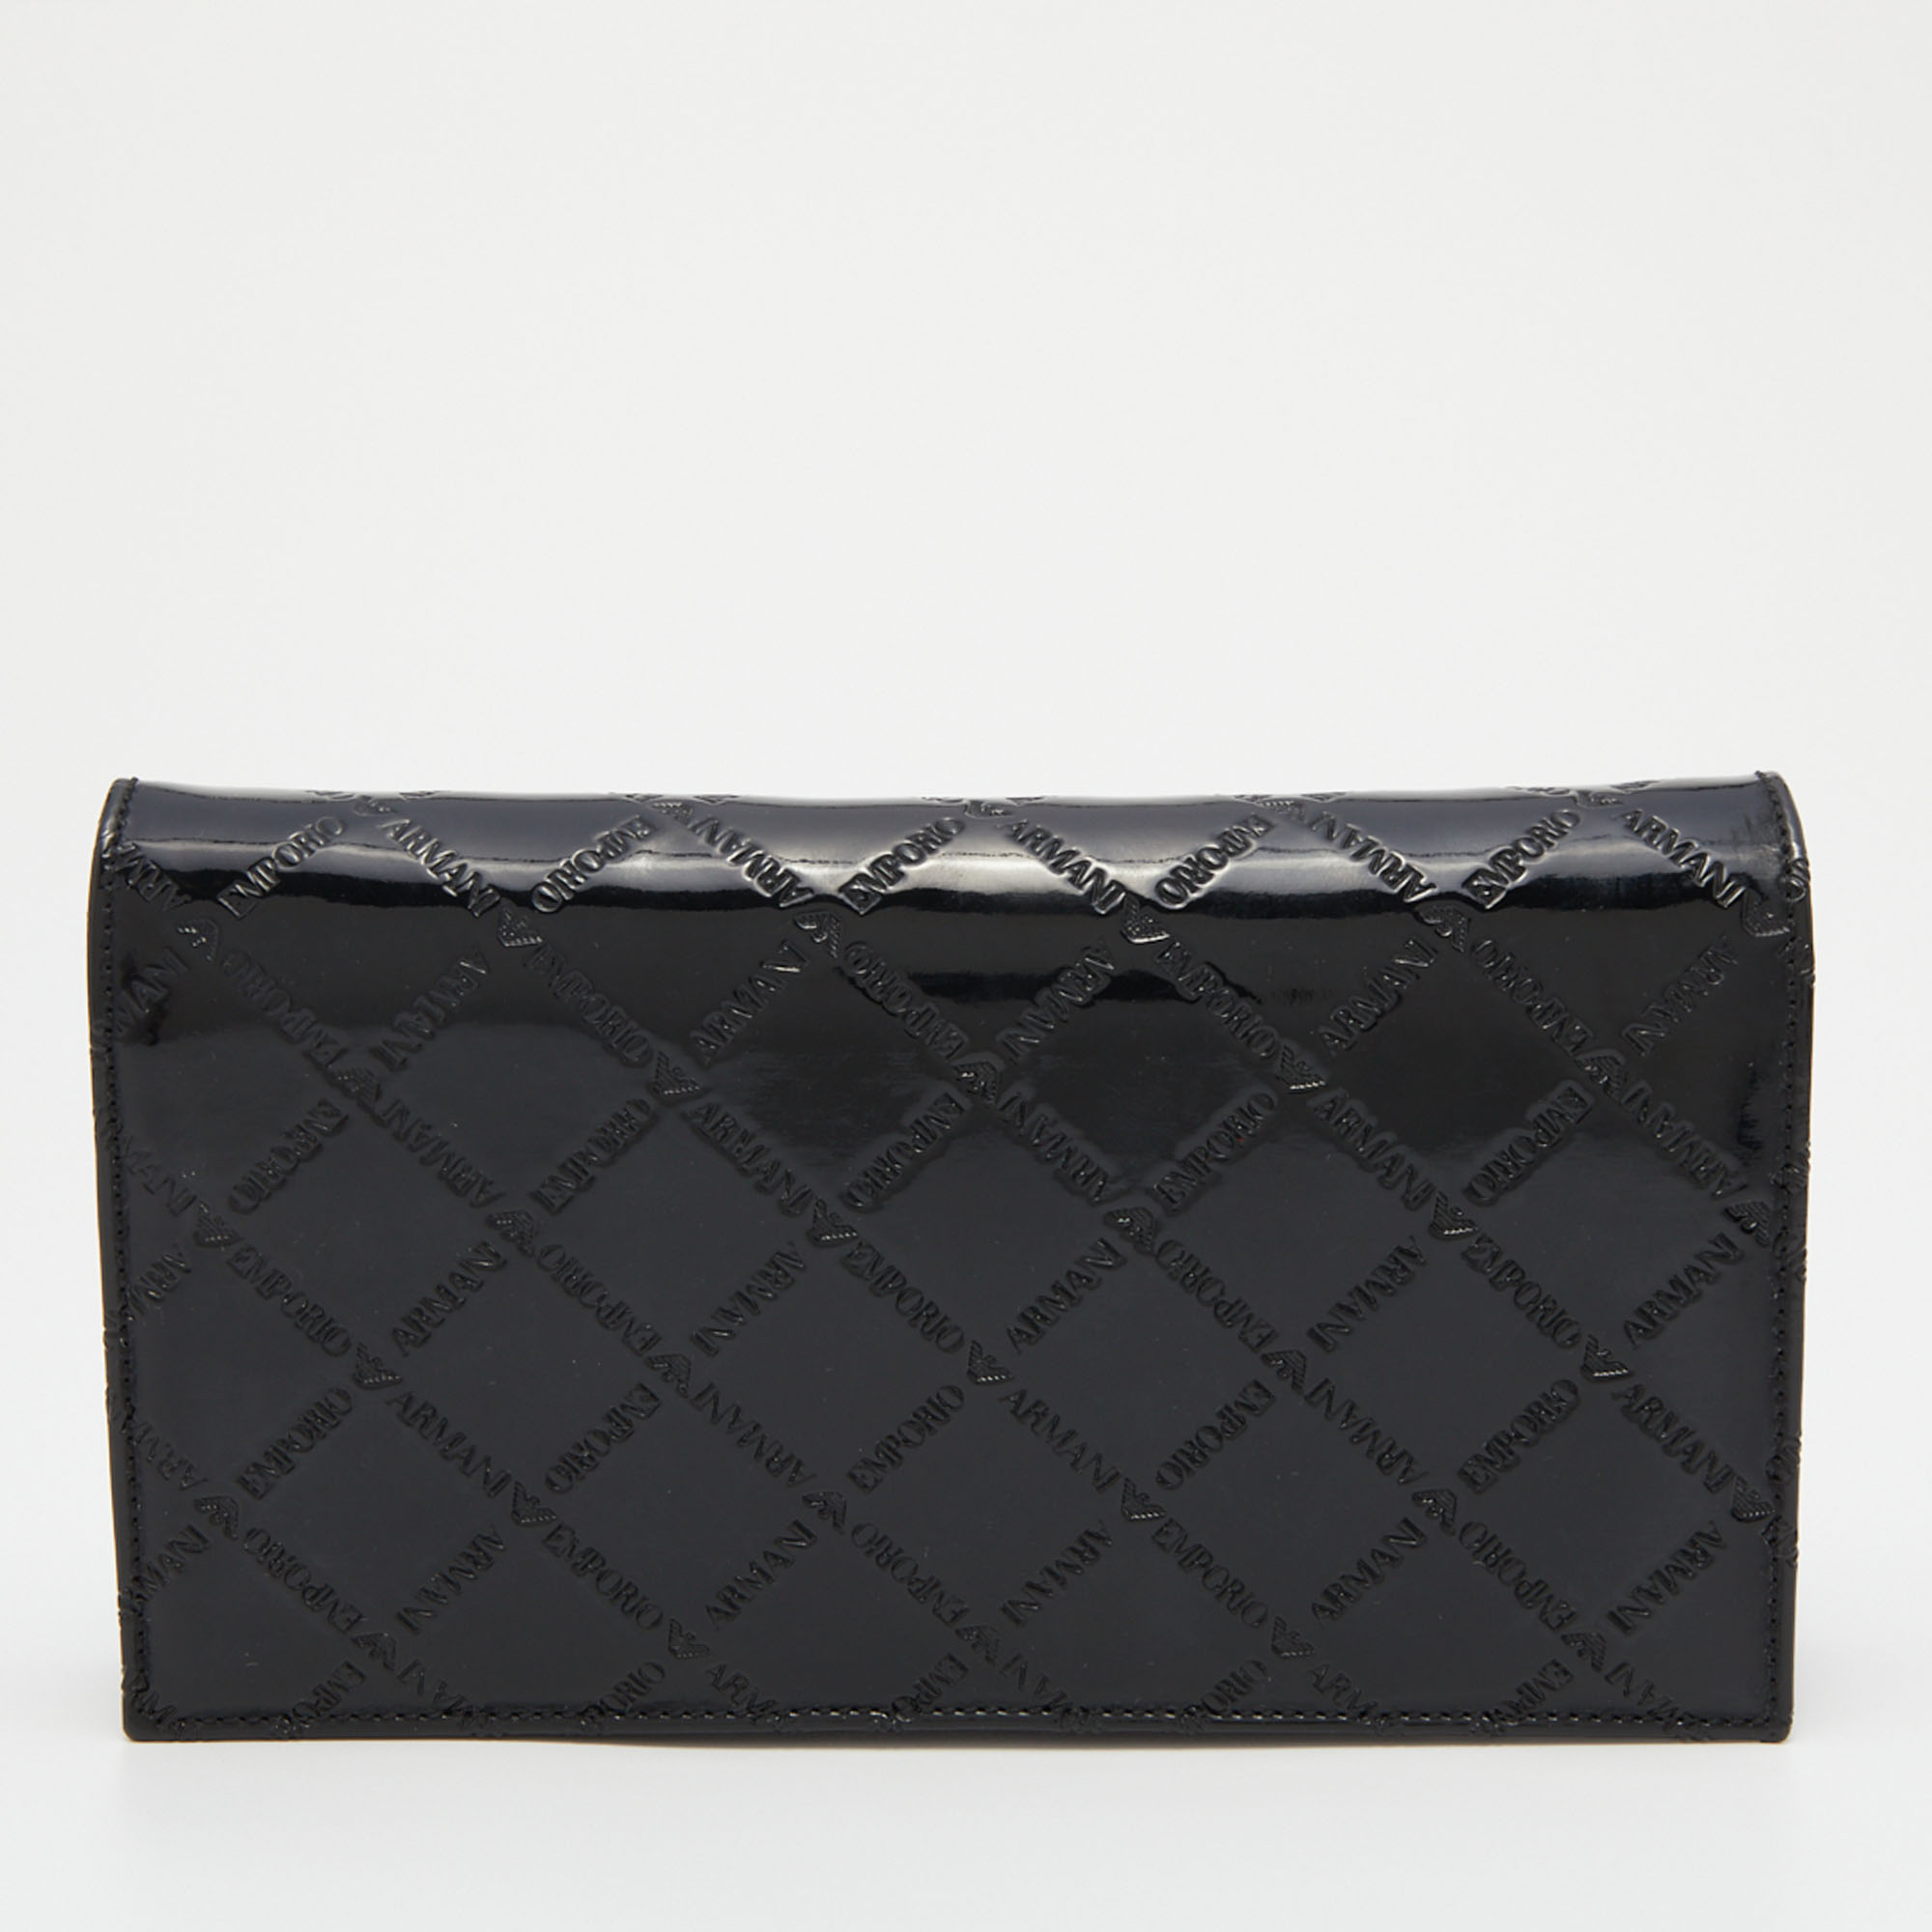 Pre-owned Emporio Armani Black Embossed Patent Leather Continental Wallet